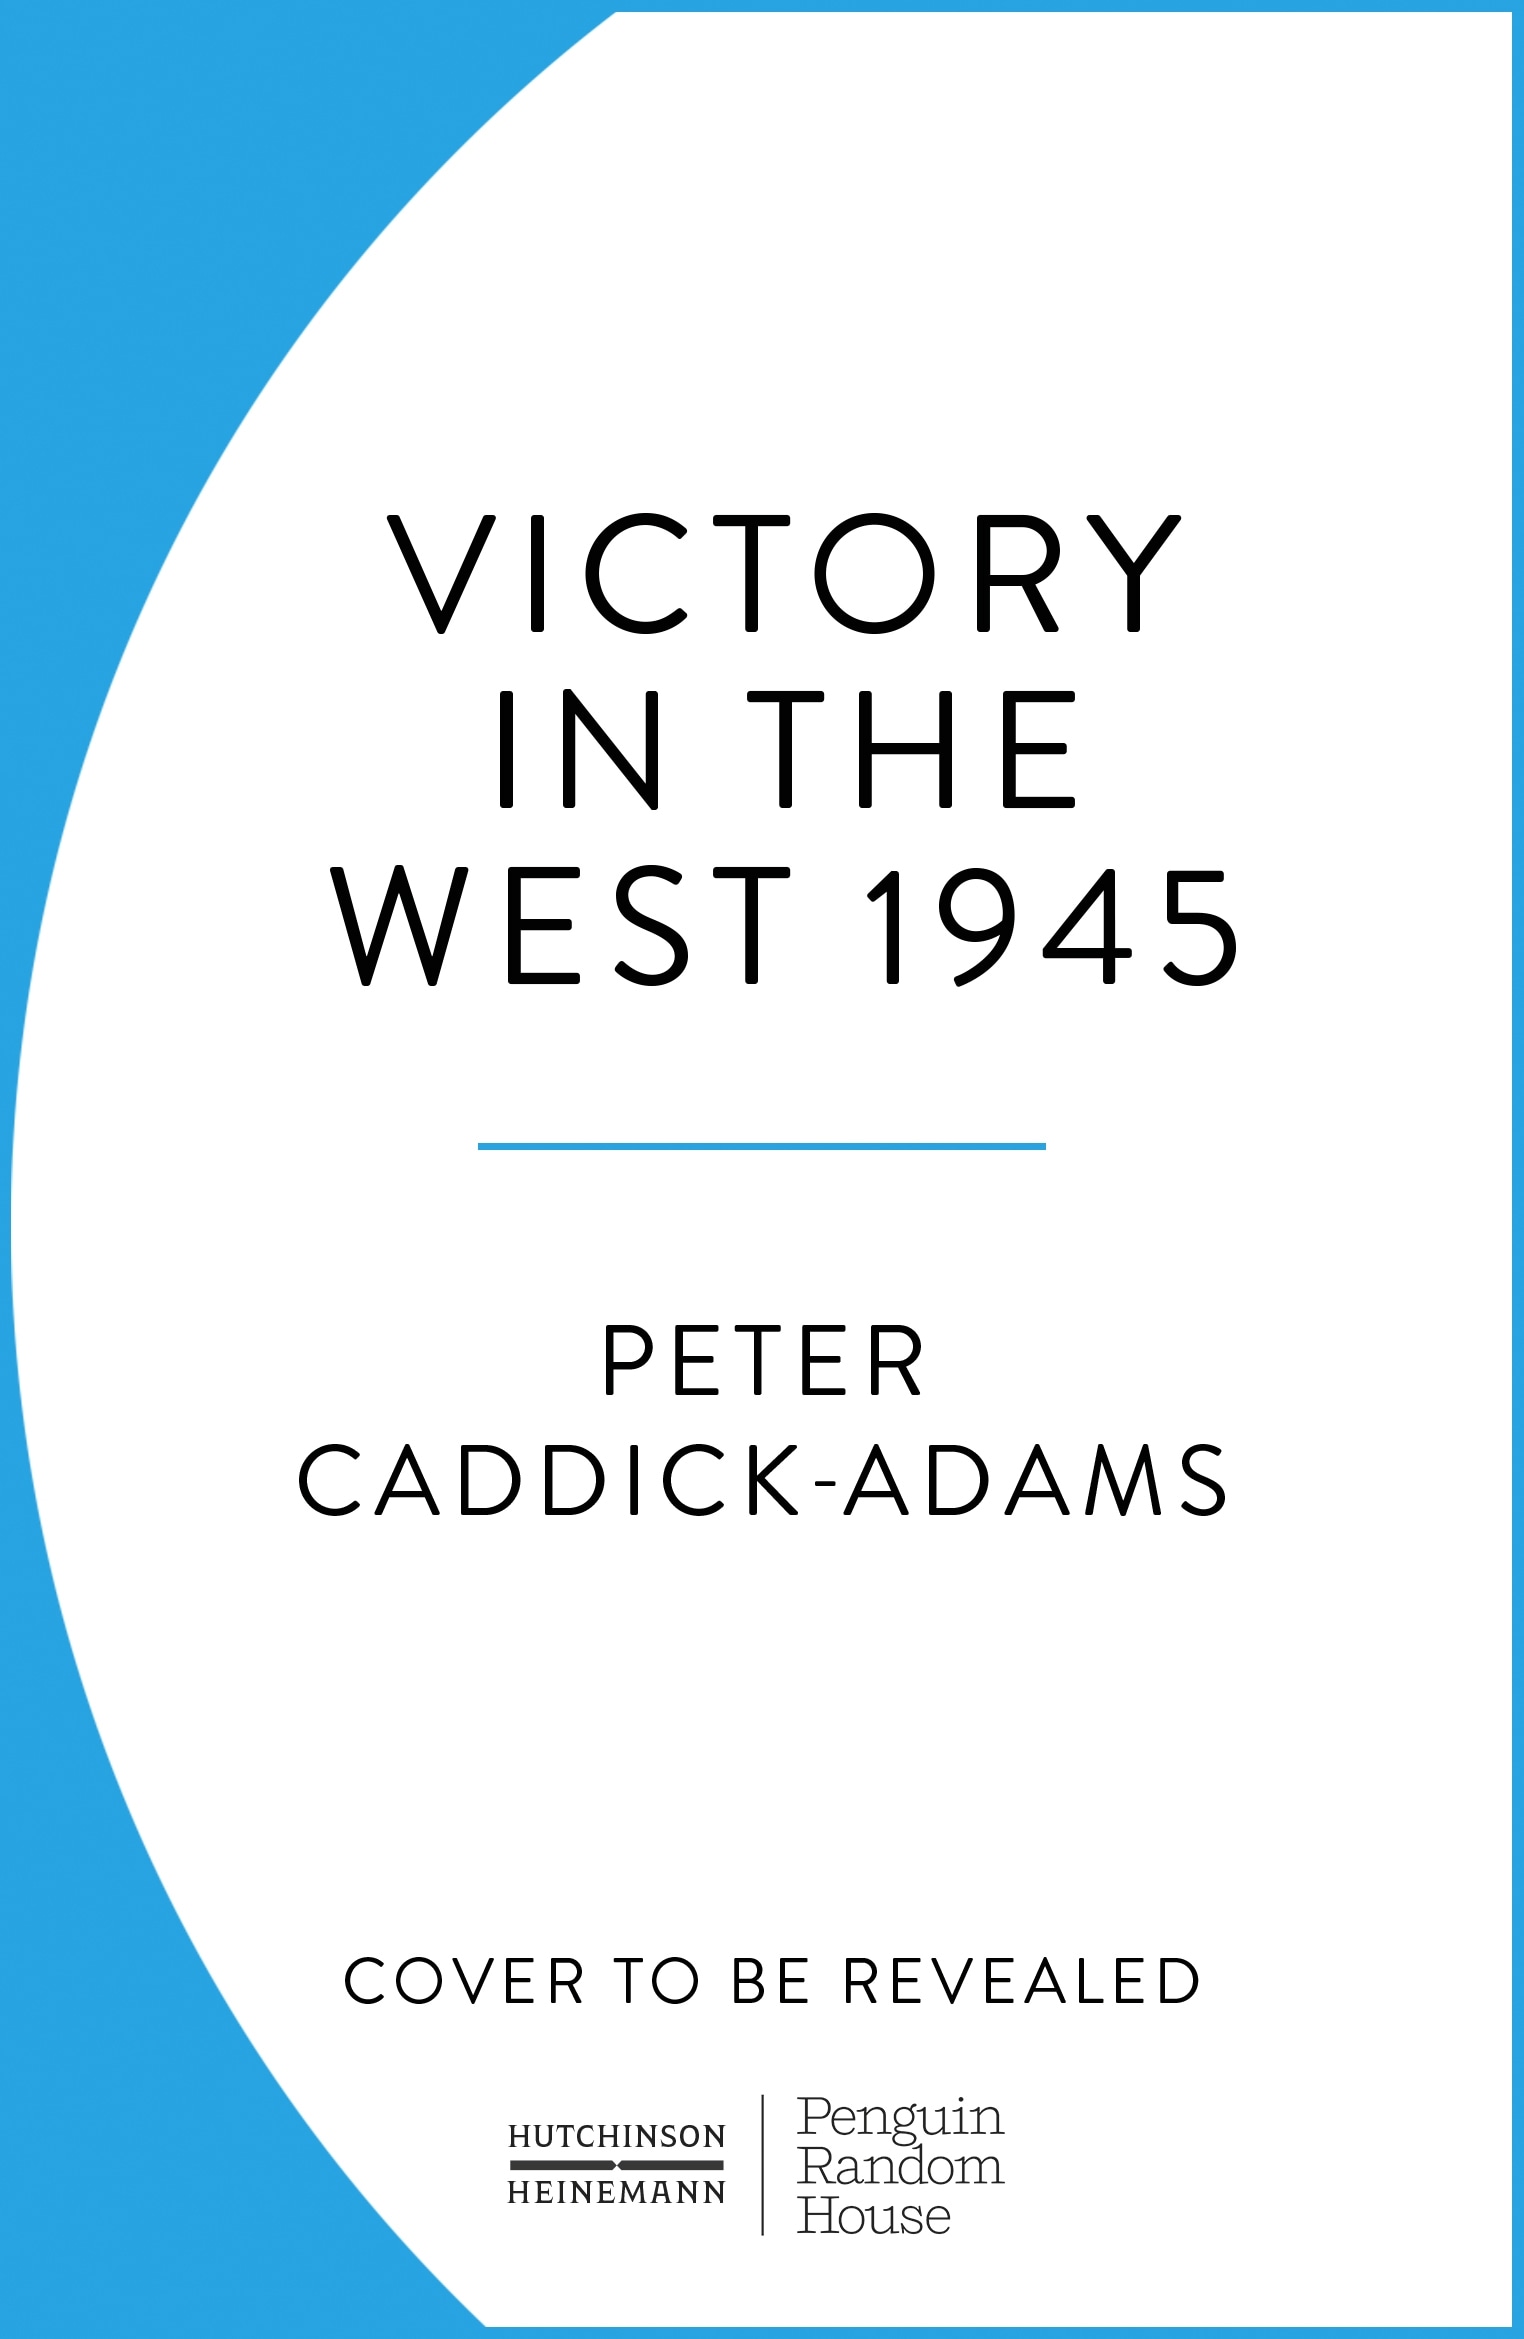 Book “Victory in the West 1945” by Peter Caddick-Adams — May 19, 2022